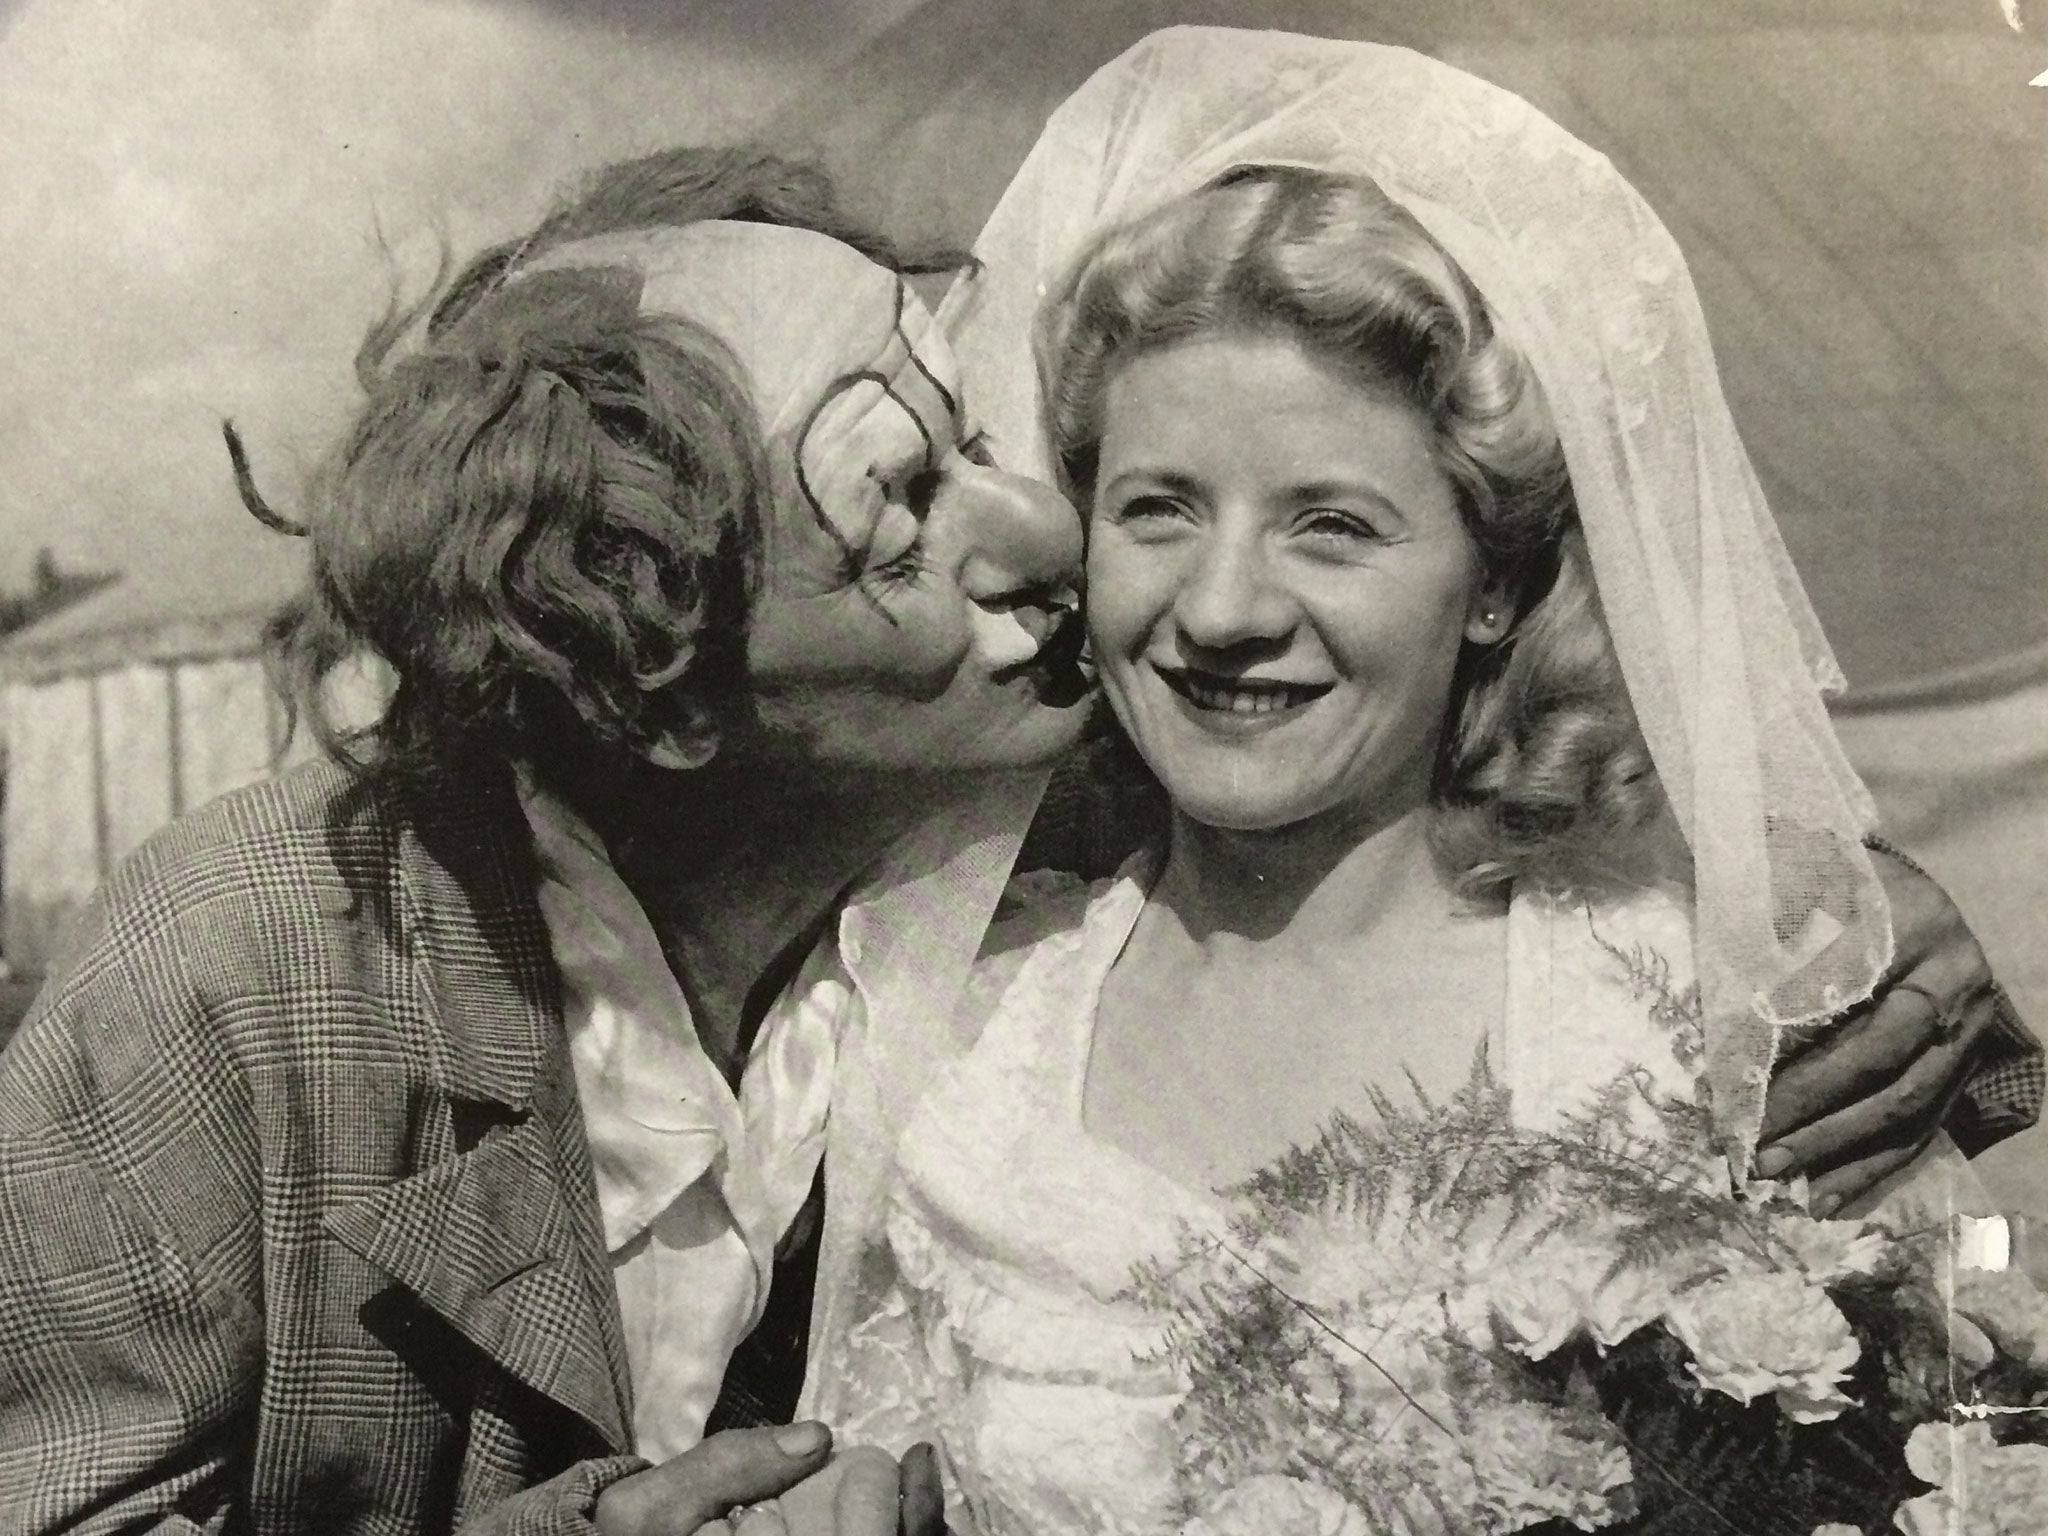 Kerr on her wedding day with her father Nicolai Poliakoff, aka Coco the Clown